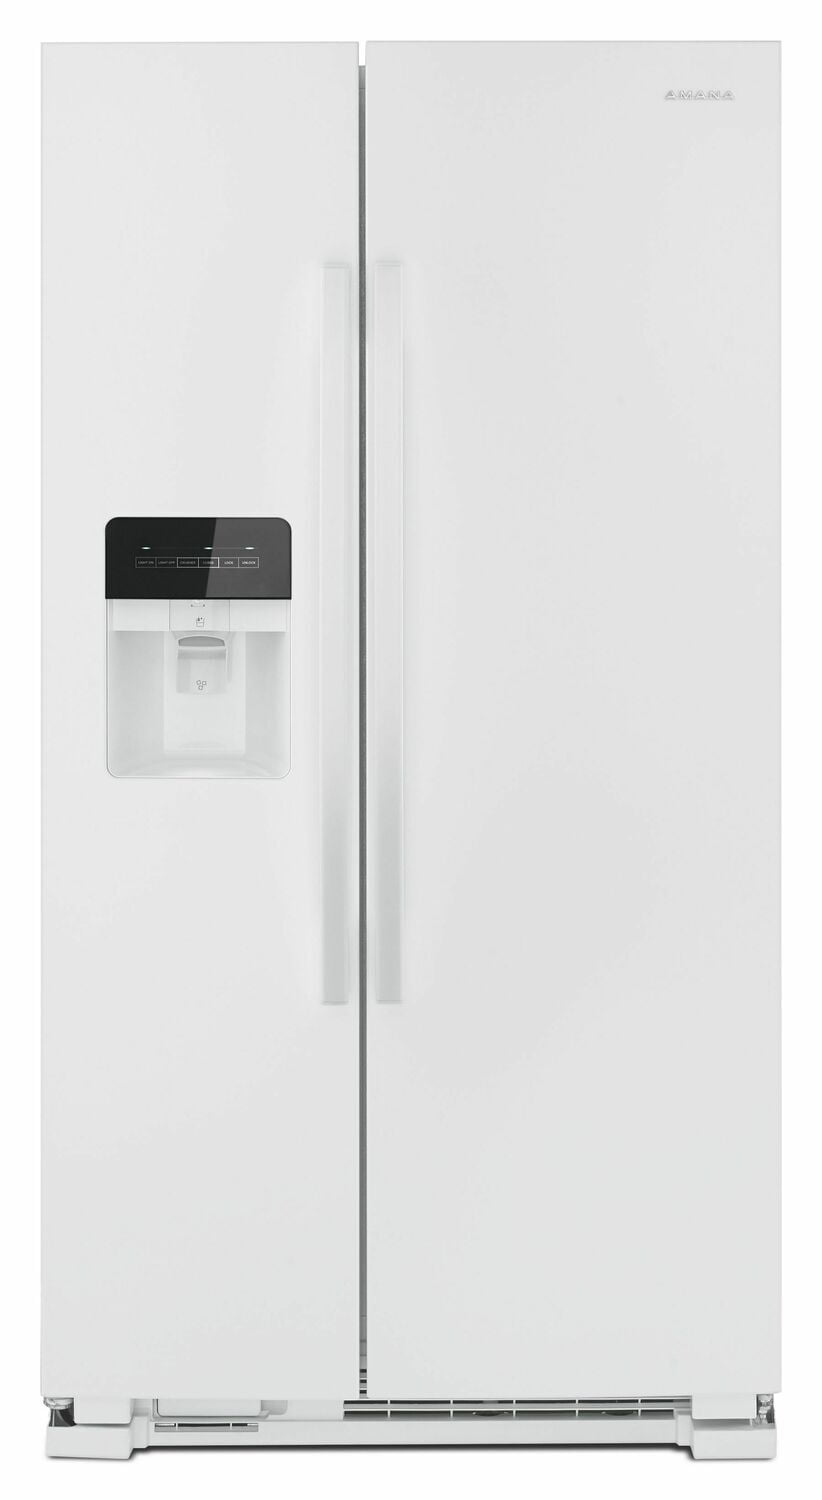 Amana ASI2175GRW 33-Inch Side-By-Side Refrigerator With Dual Pad External Ice And Water Dispenser - White